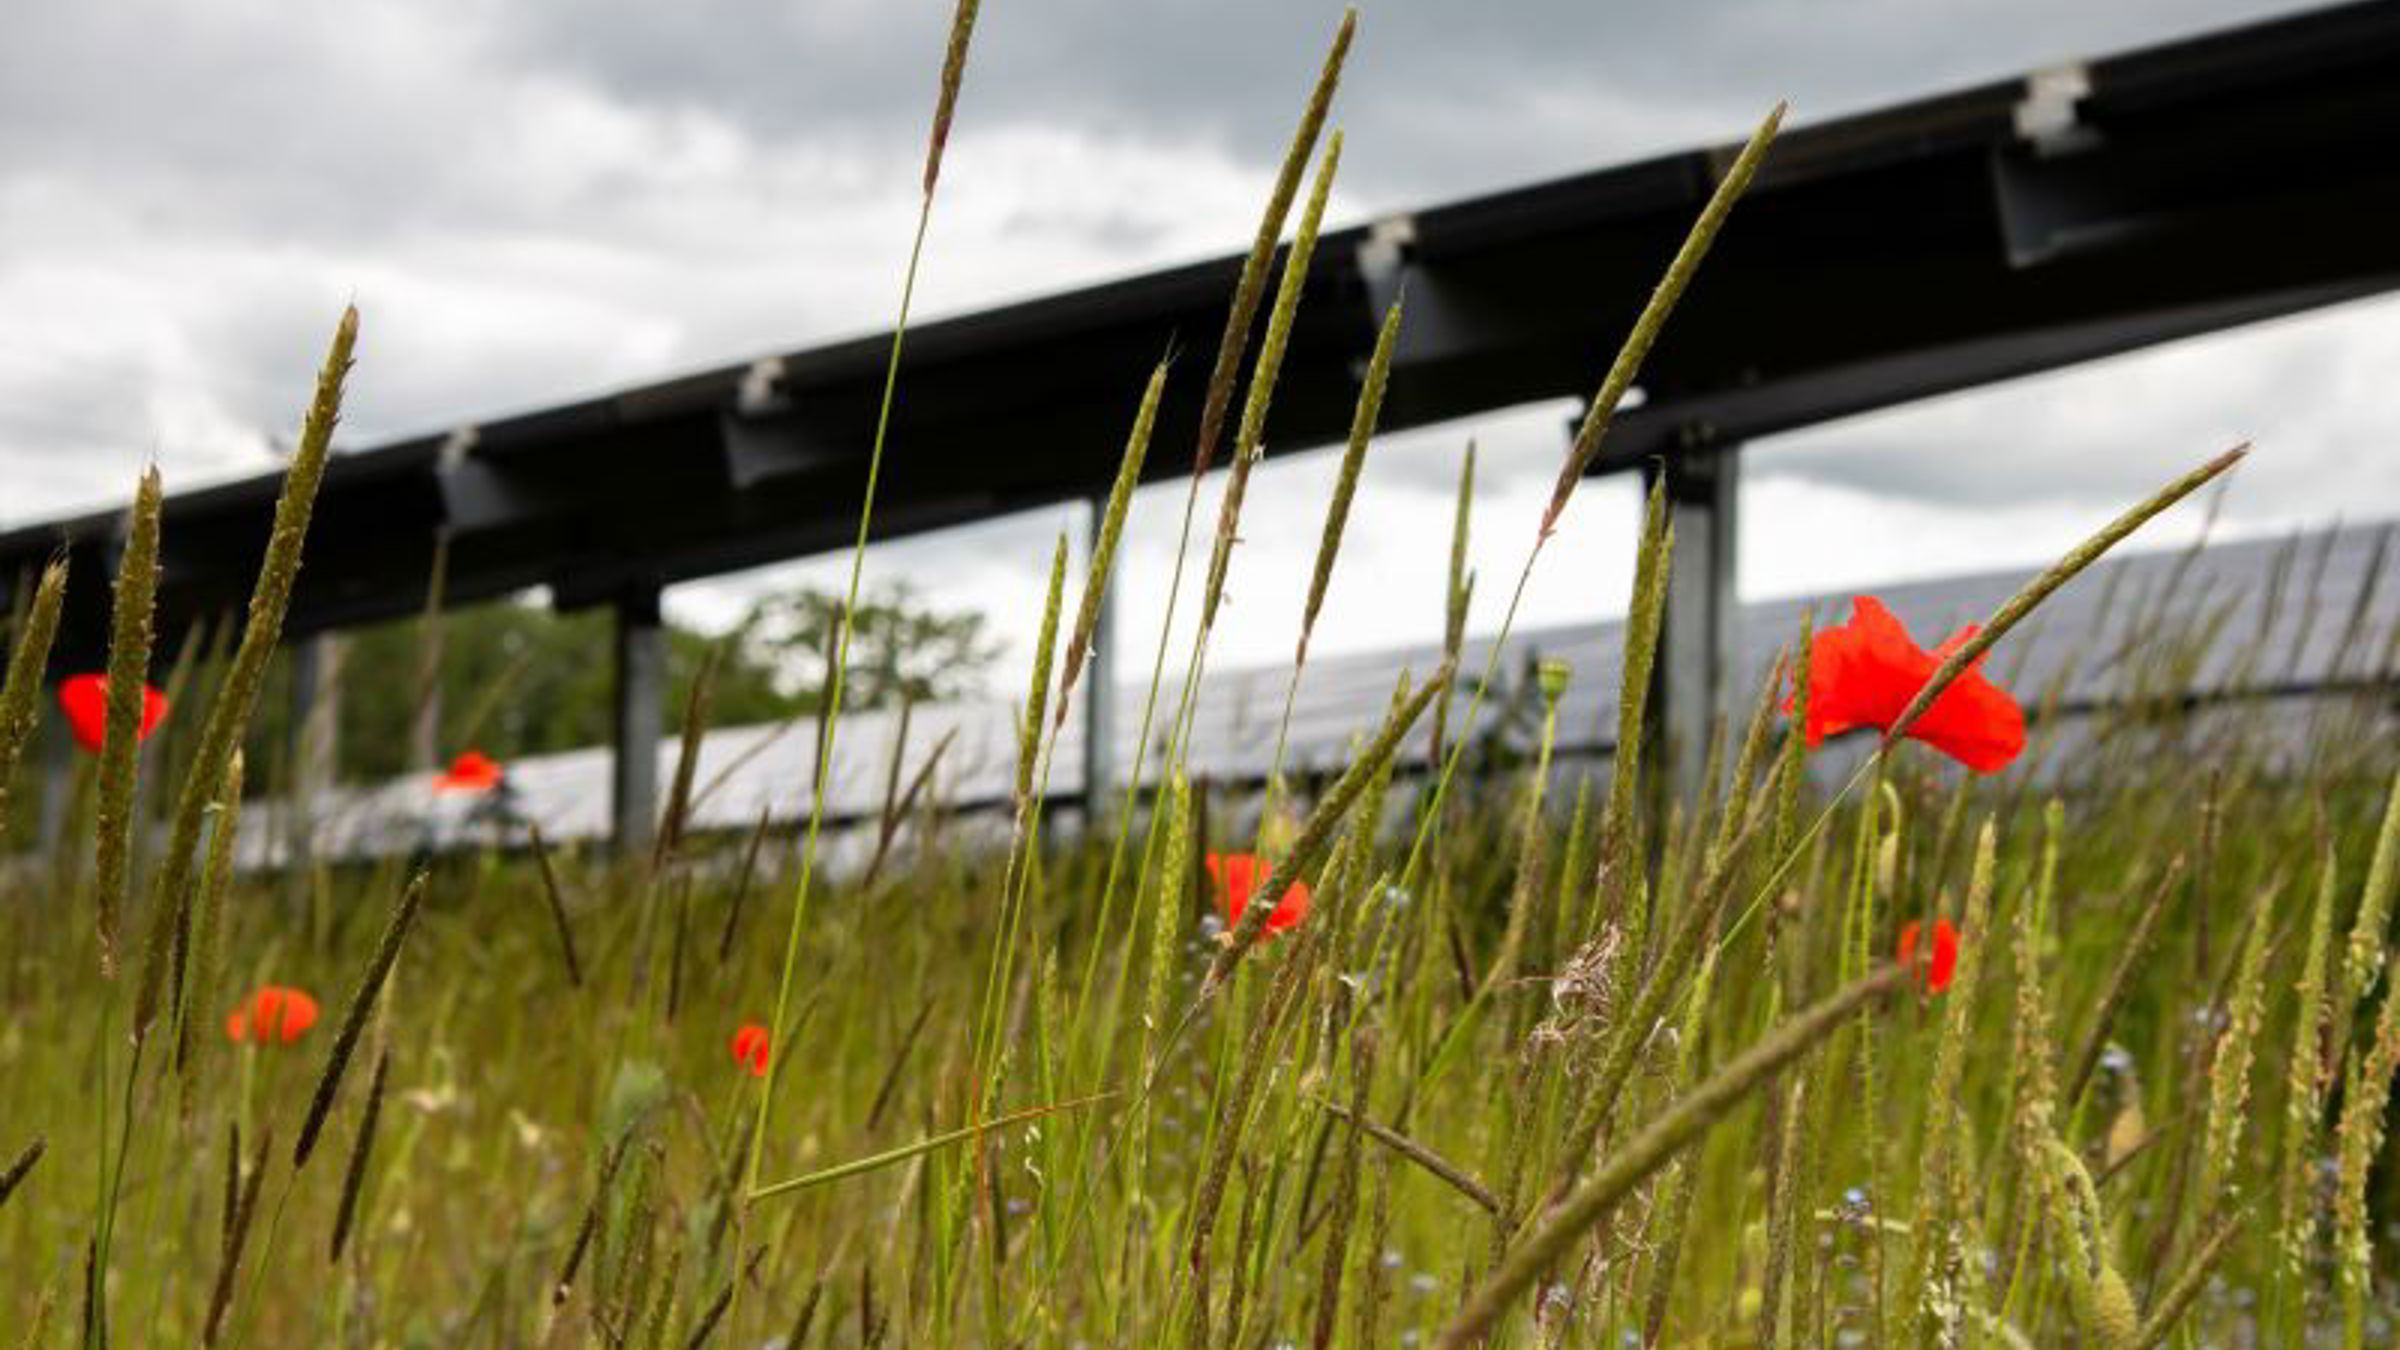 Solar panels on grass with poppy flowers